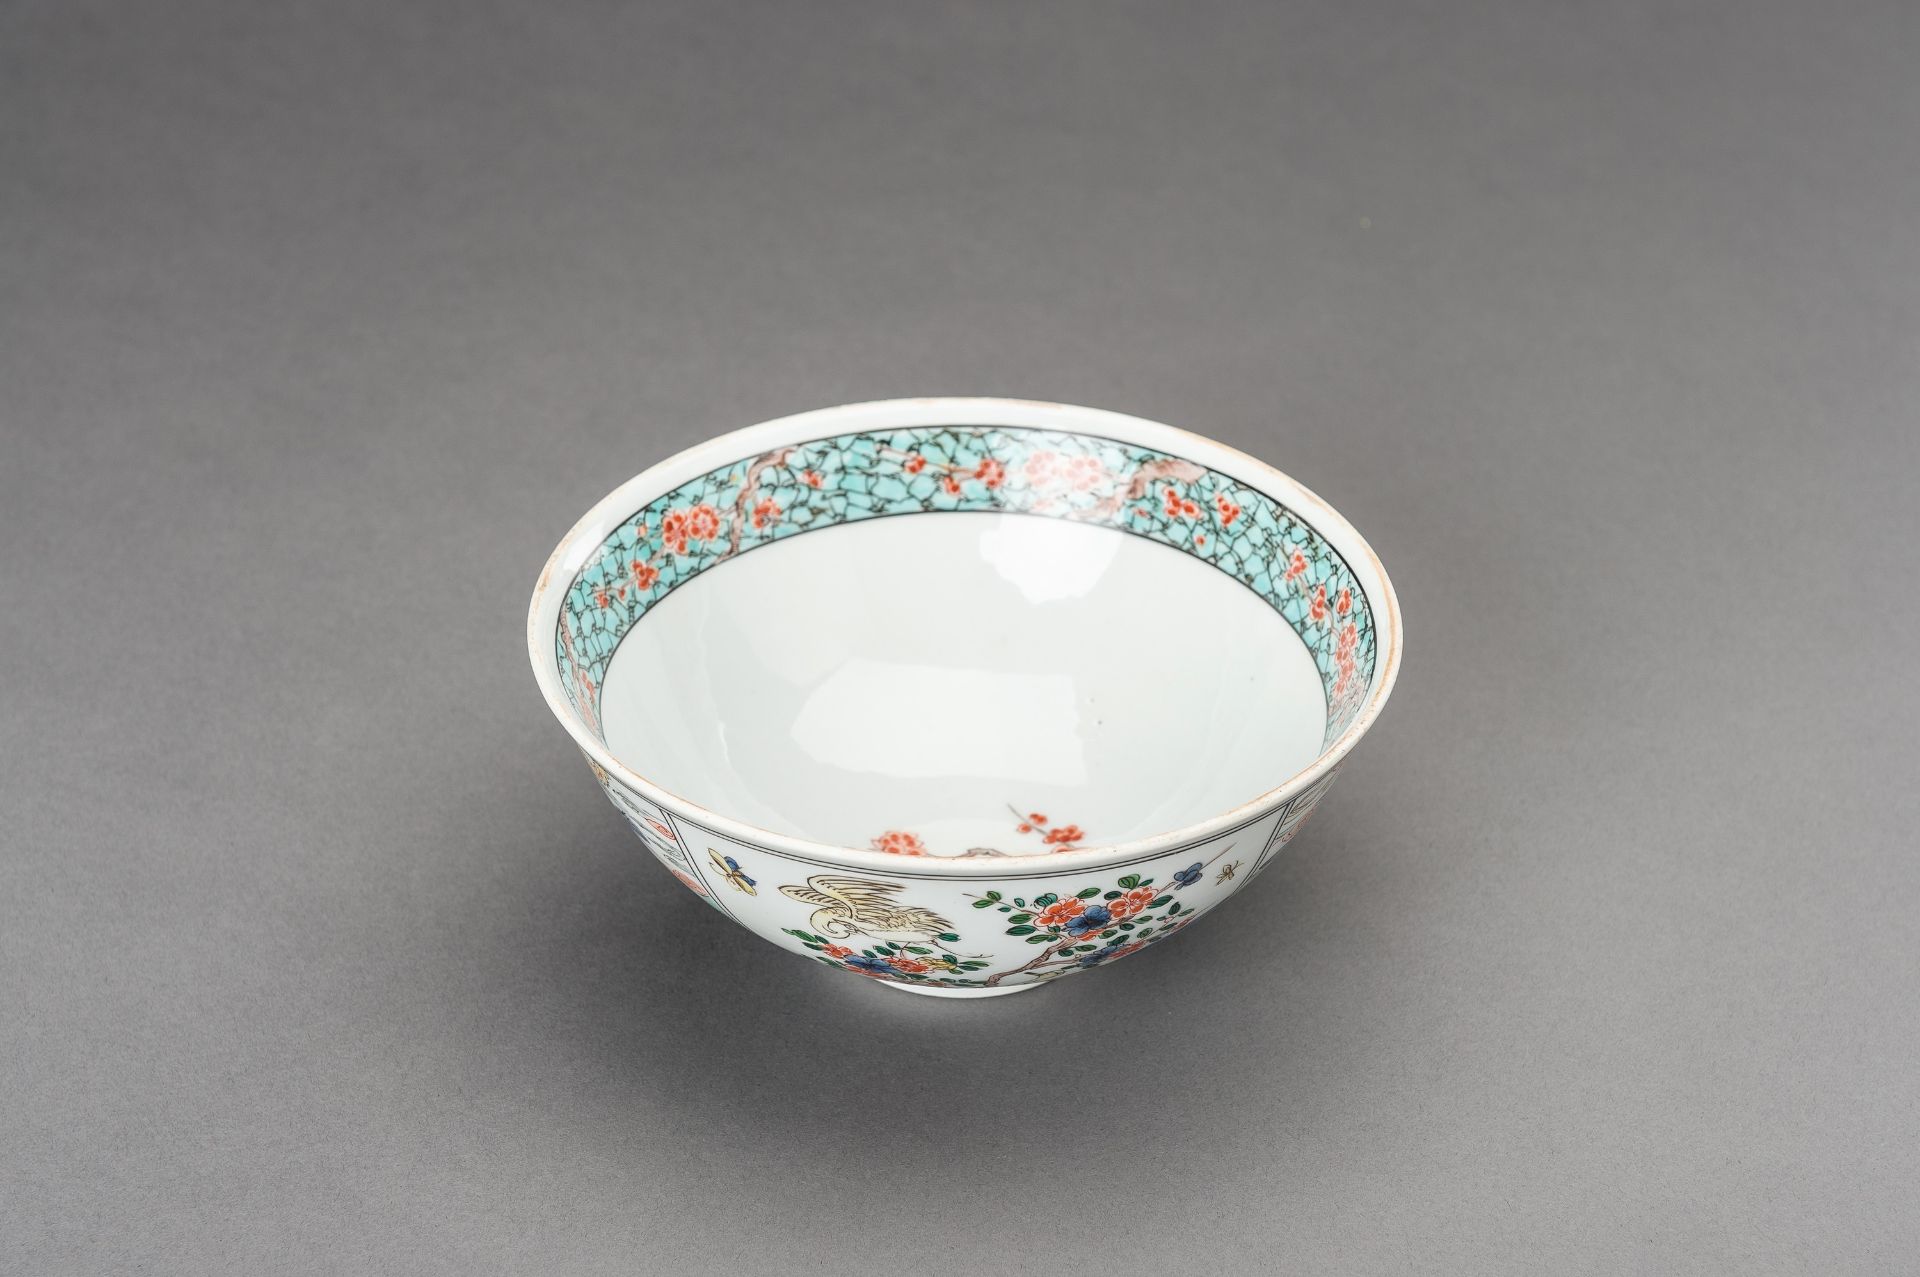 A SAMSON-STYLE COMPANY CHINOISERIE 'MYTHICAL CREATURES' PORCELAIN BOWL - Image 6 of 16